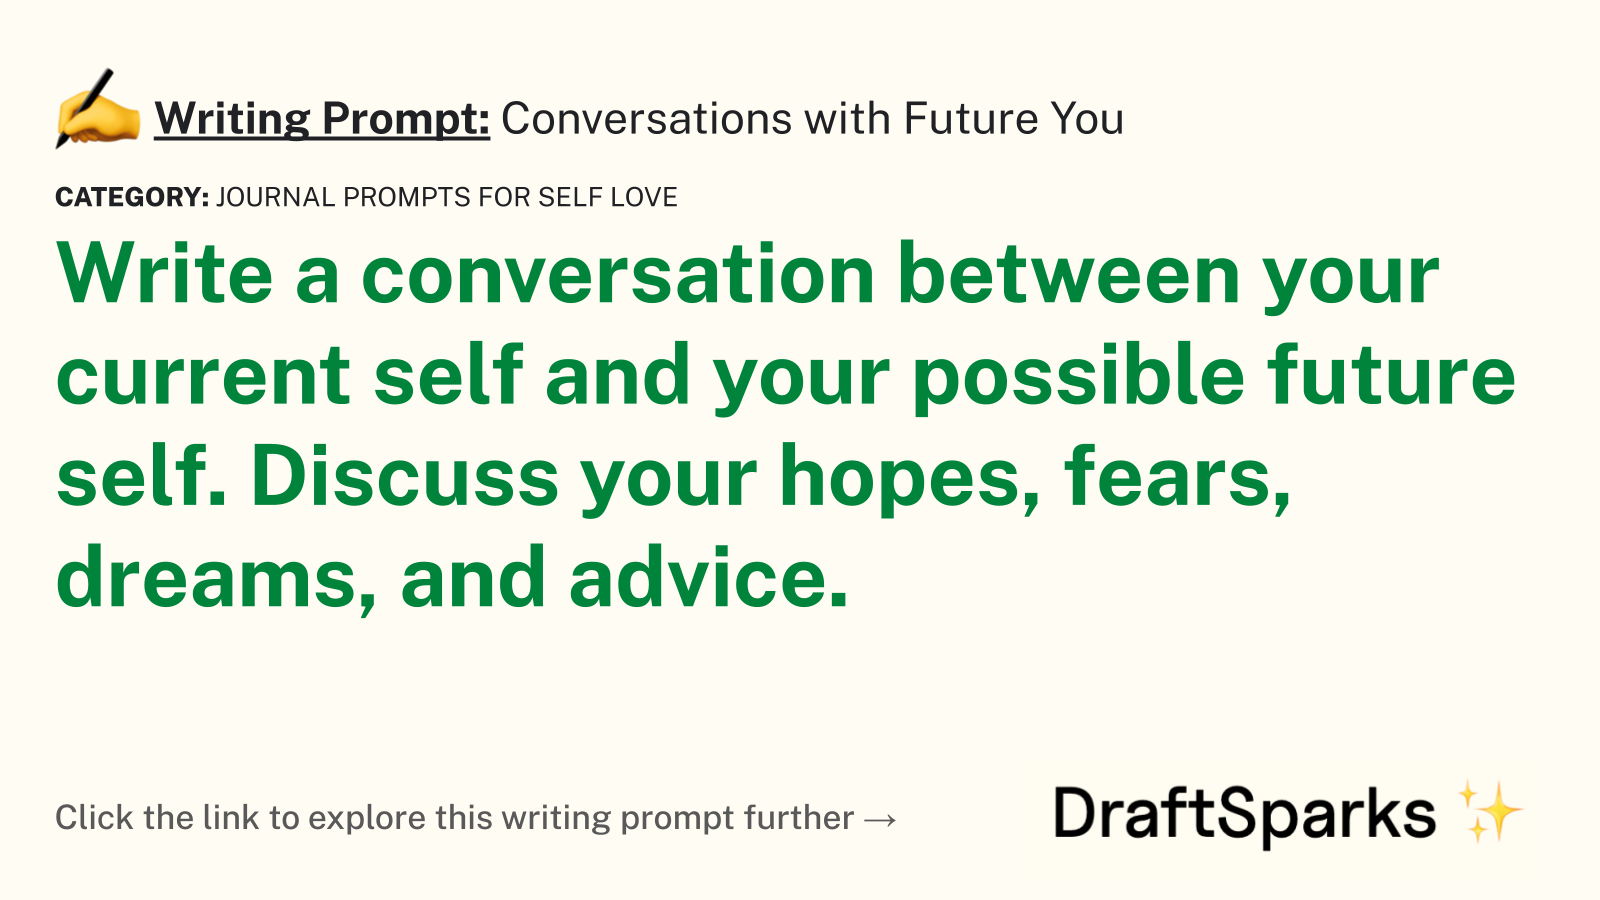 Conversations with Future You